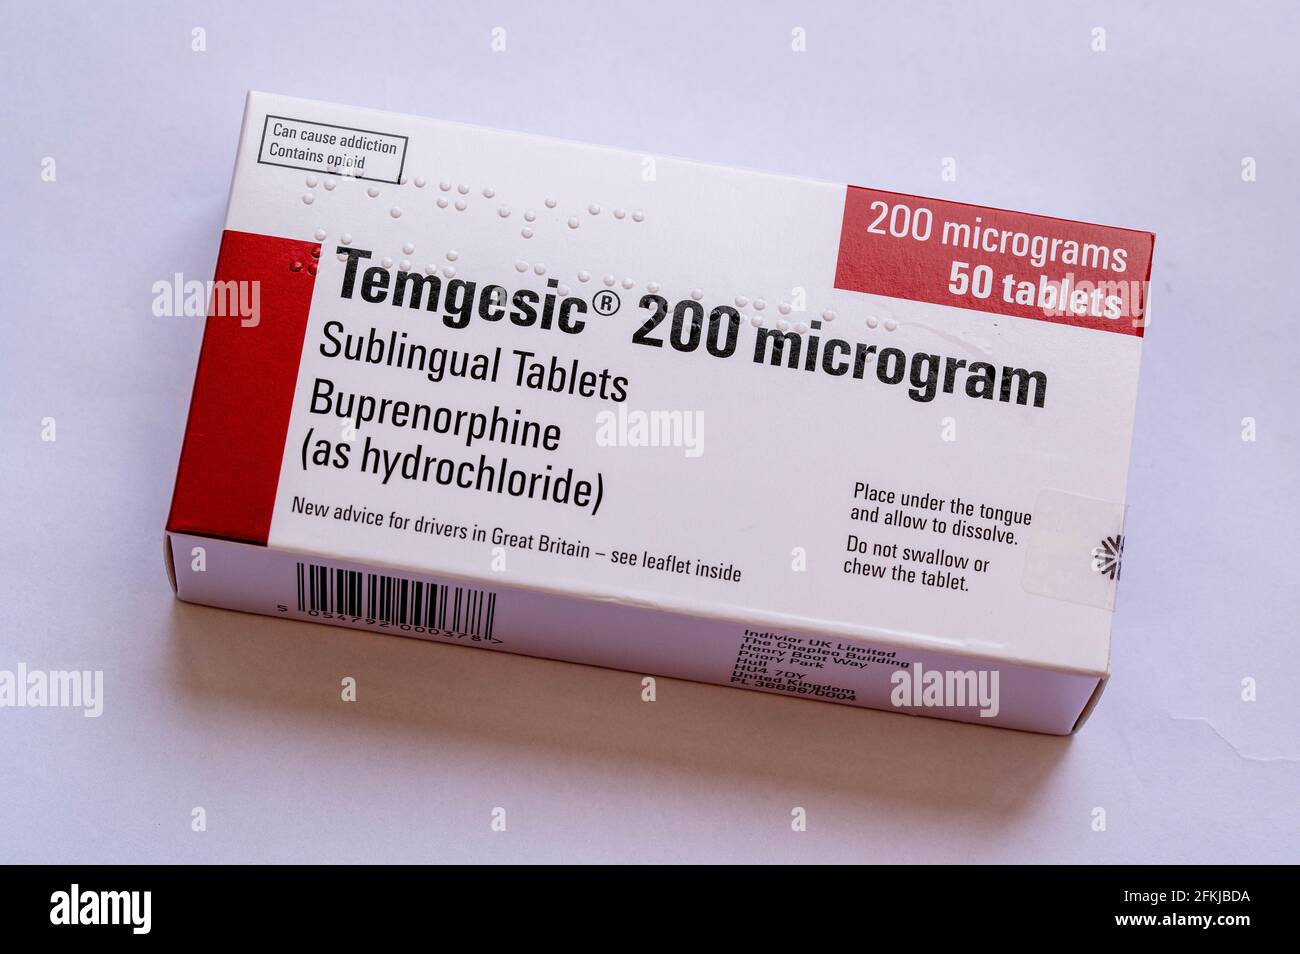 An image of a Box of Temgesic 200 micrograms sub lingual tablets for the treatment of acute and chronic pain relief Stock Photo